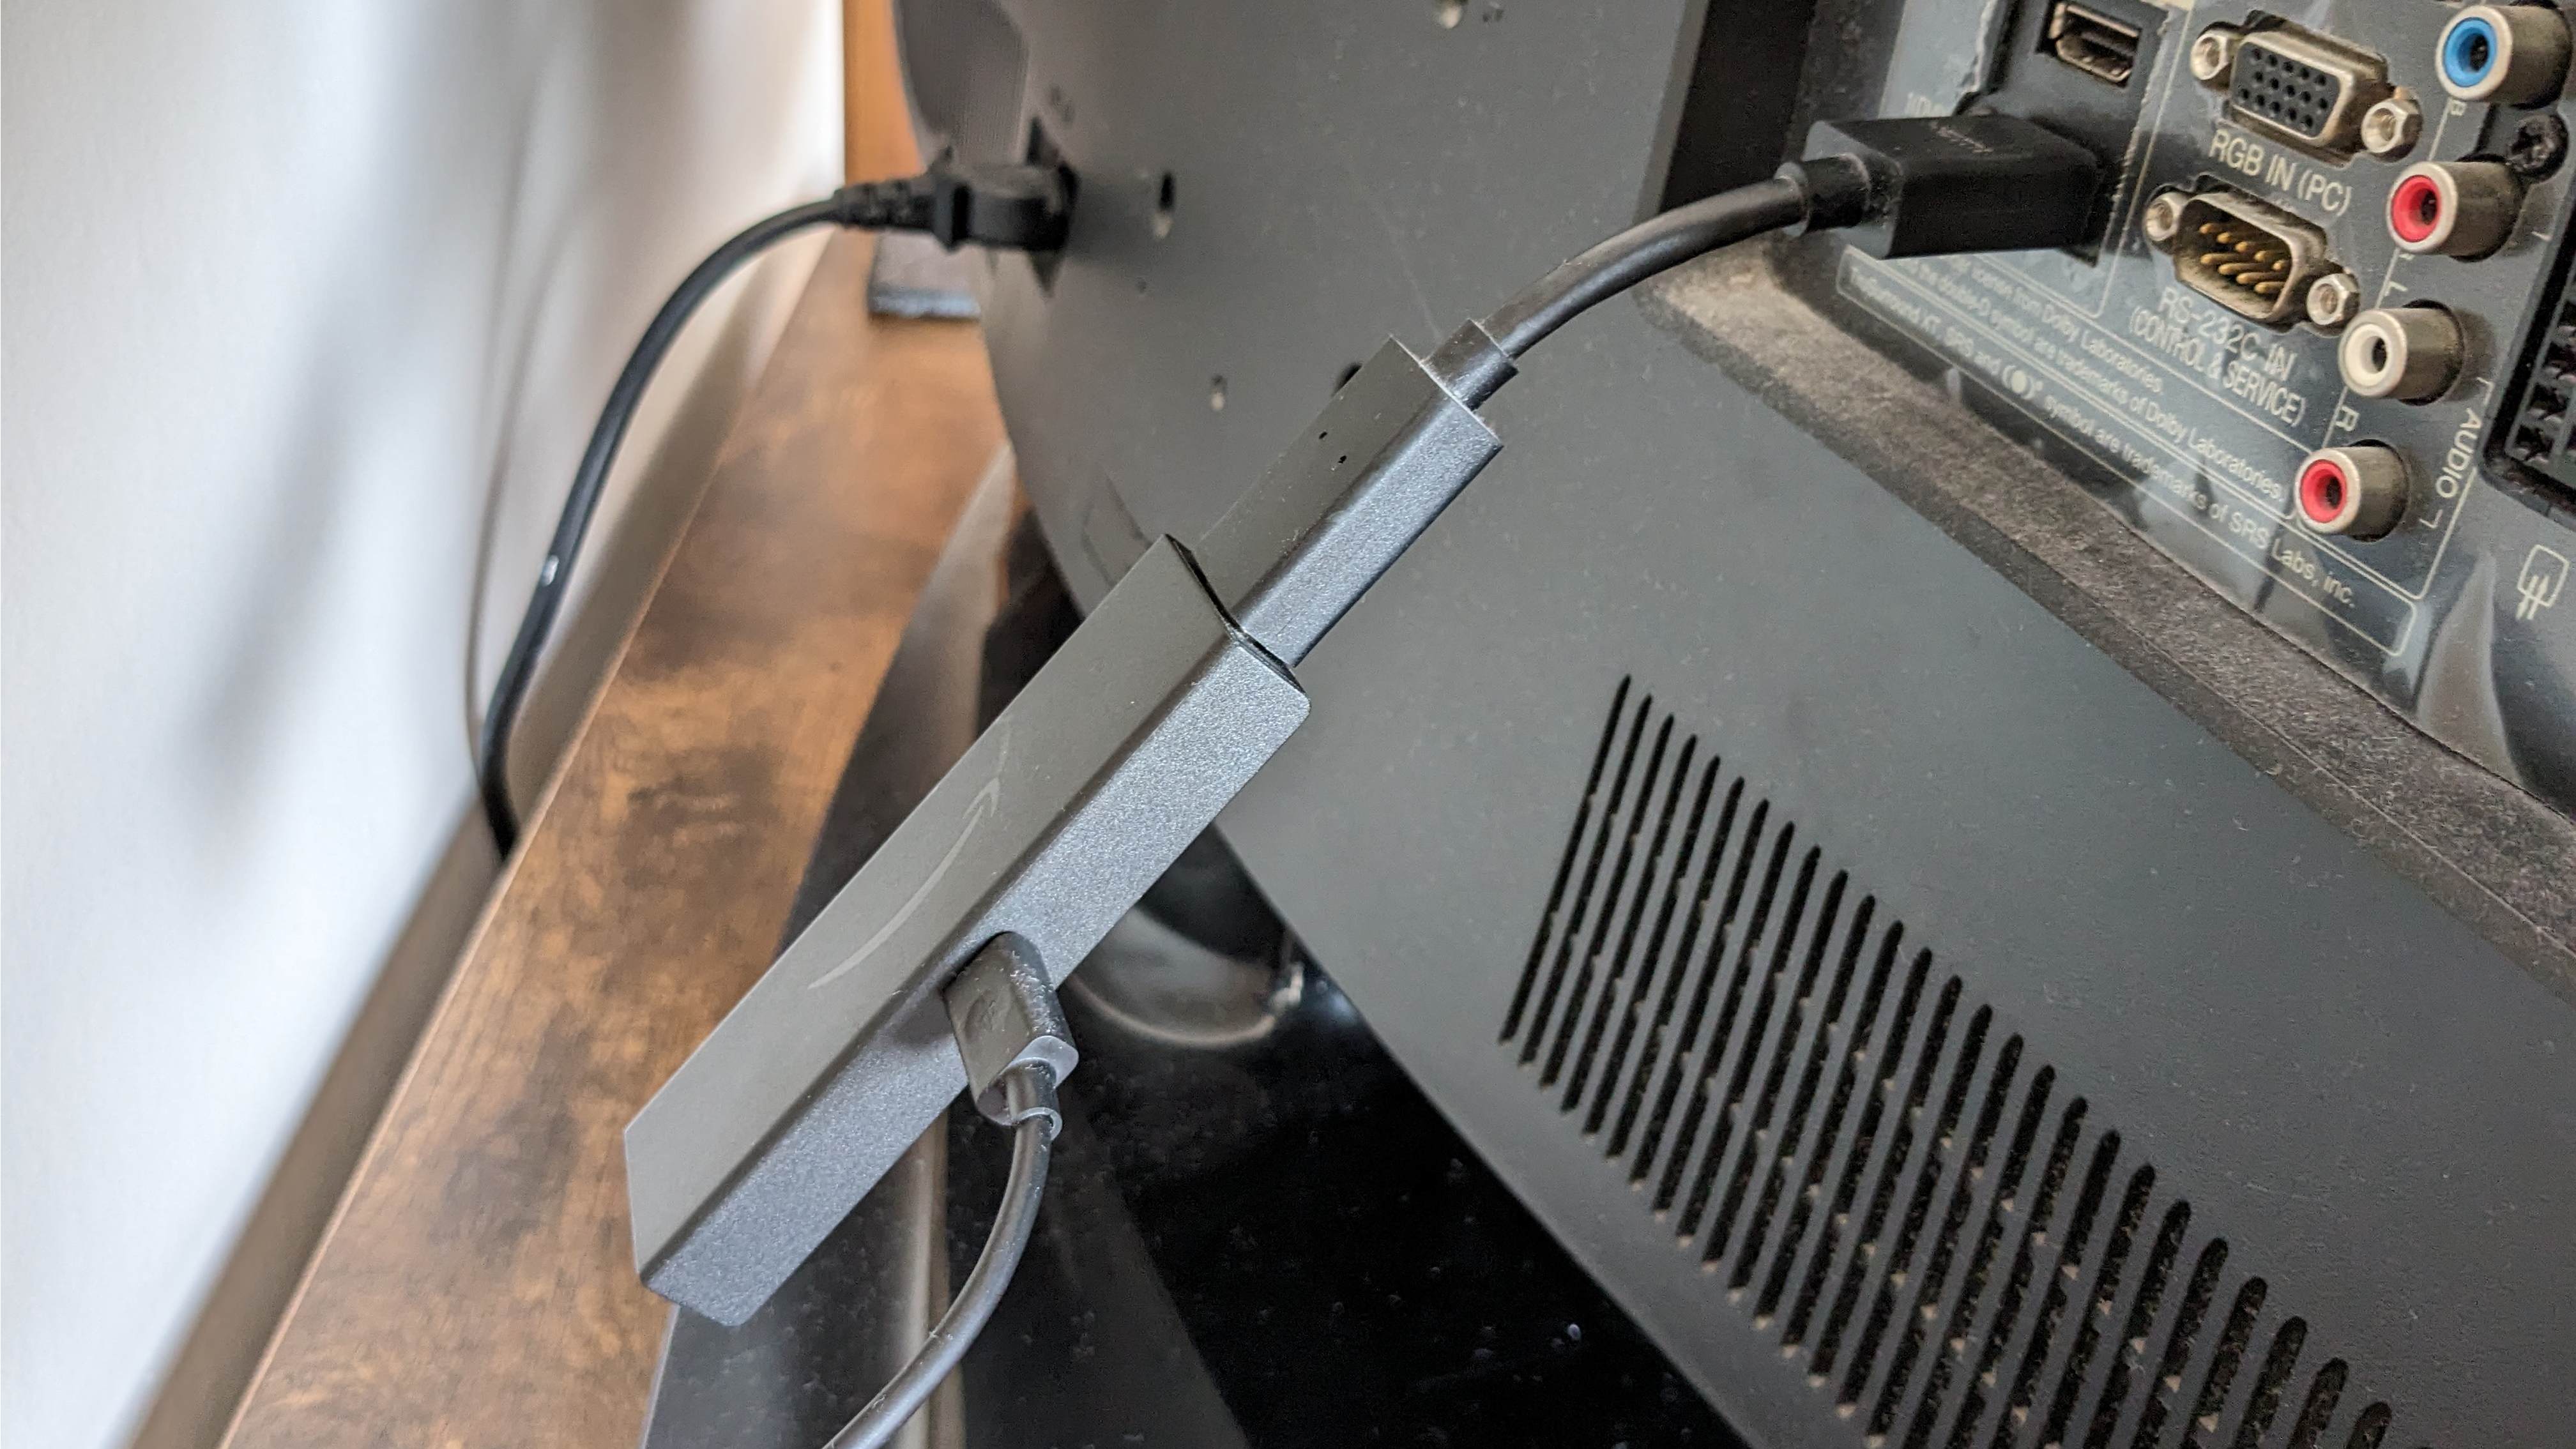 An Amazon Fire TV Stick 4K plugged into its HDMI extended plugged in the back of a TV.